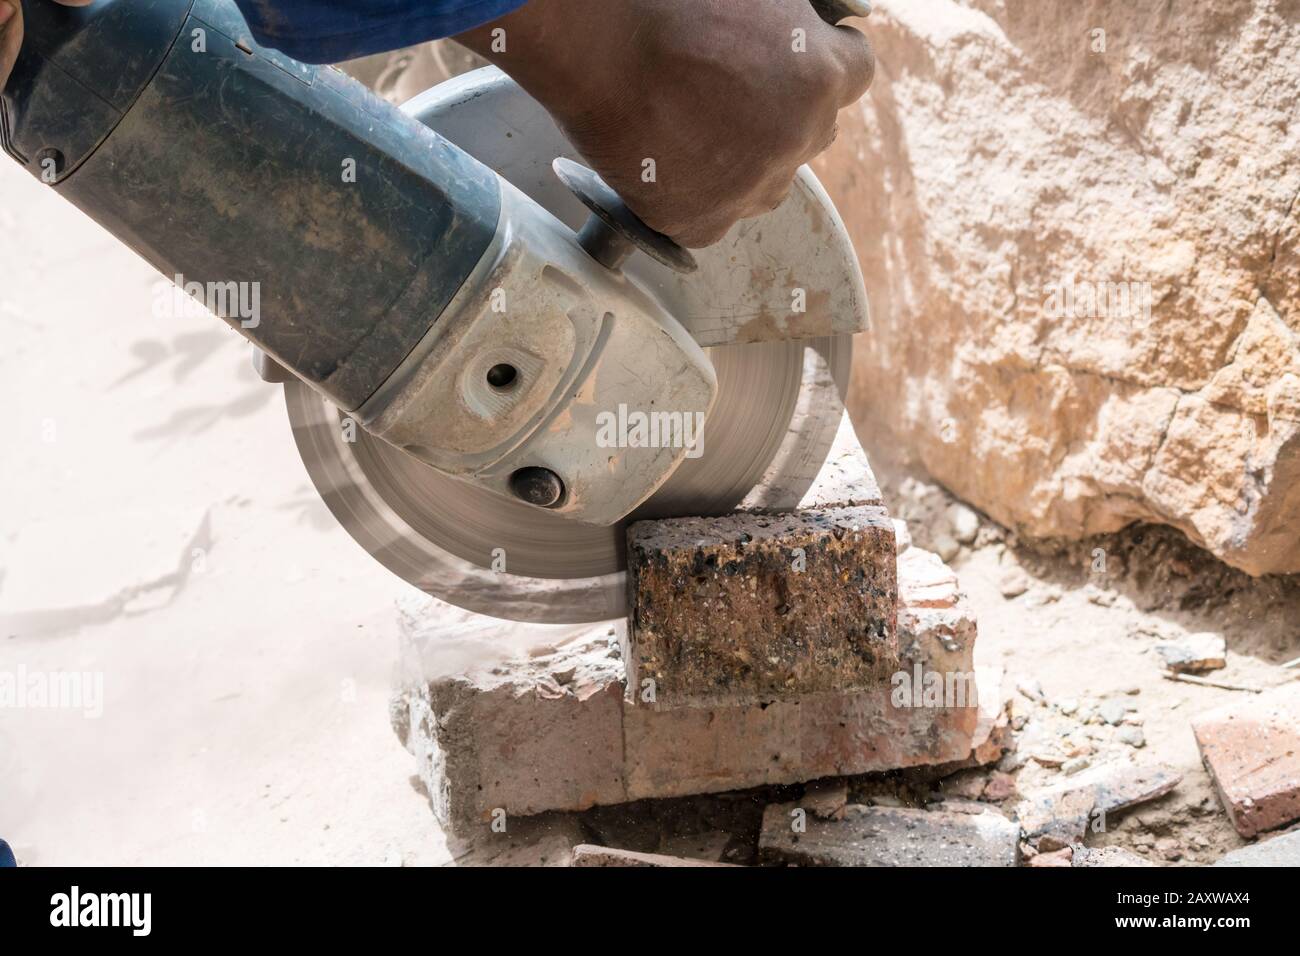 angle grinder, side grinder, disc grinder which is a handheld power tool being used to cut or grind bricks by a worker or operator, close up Stock Photo